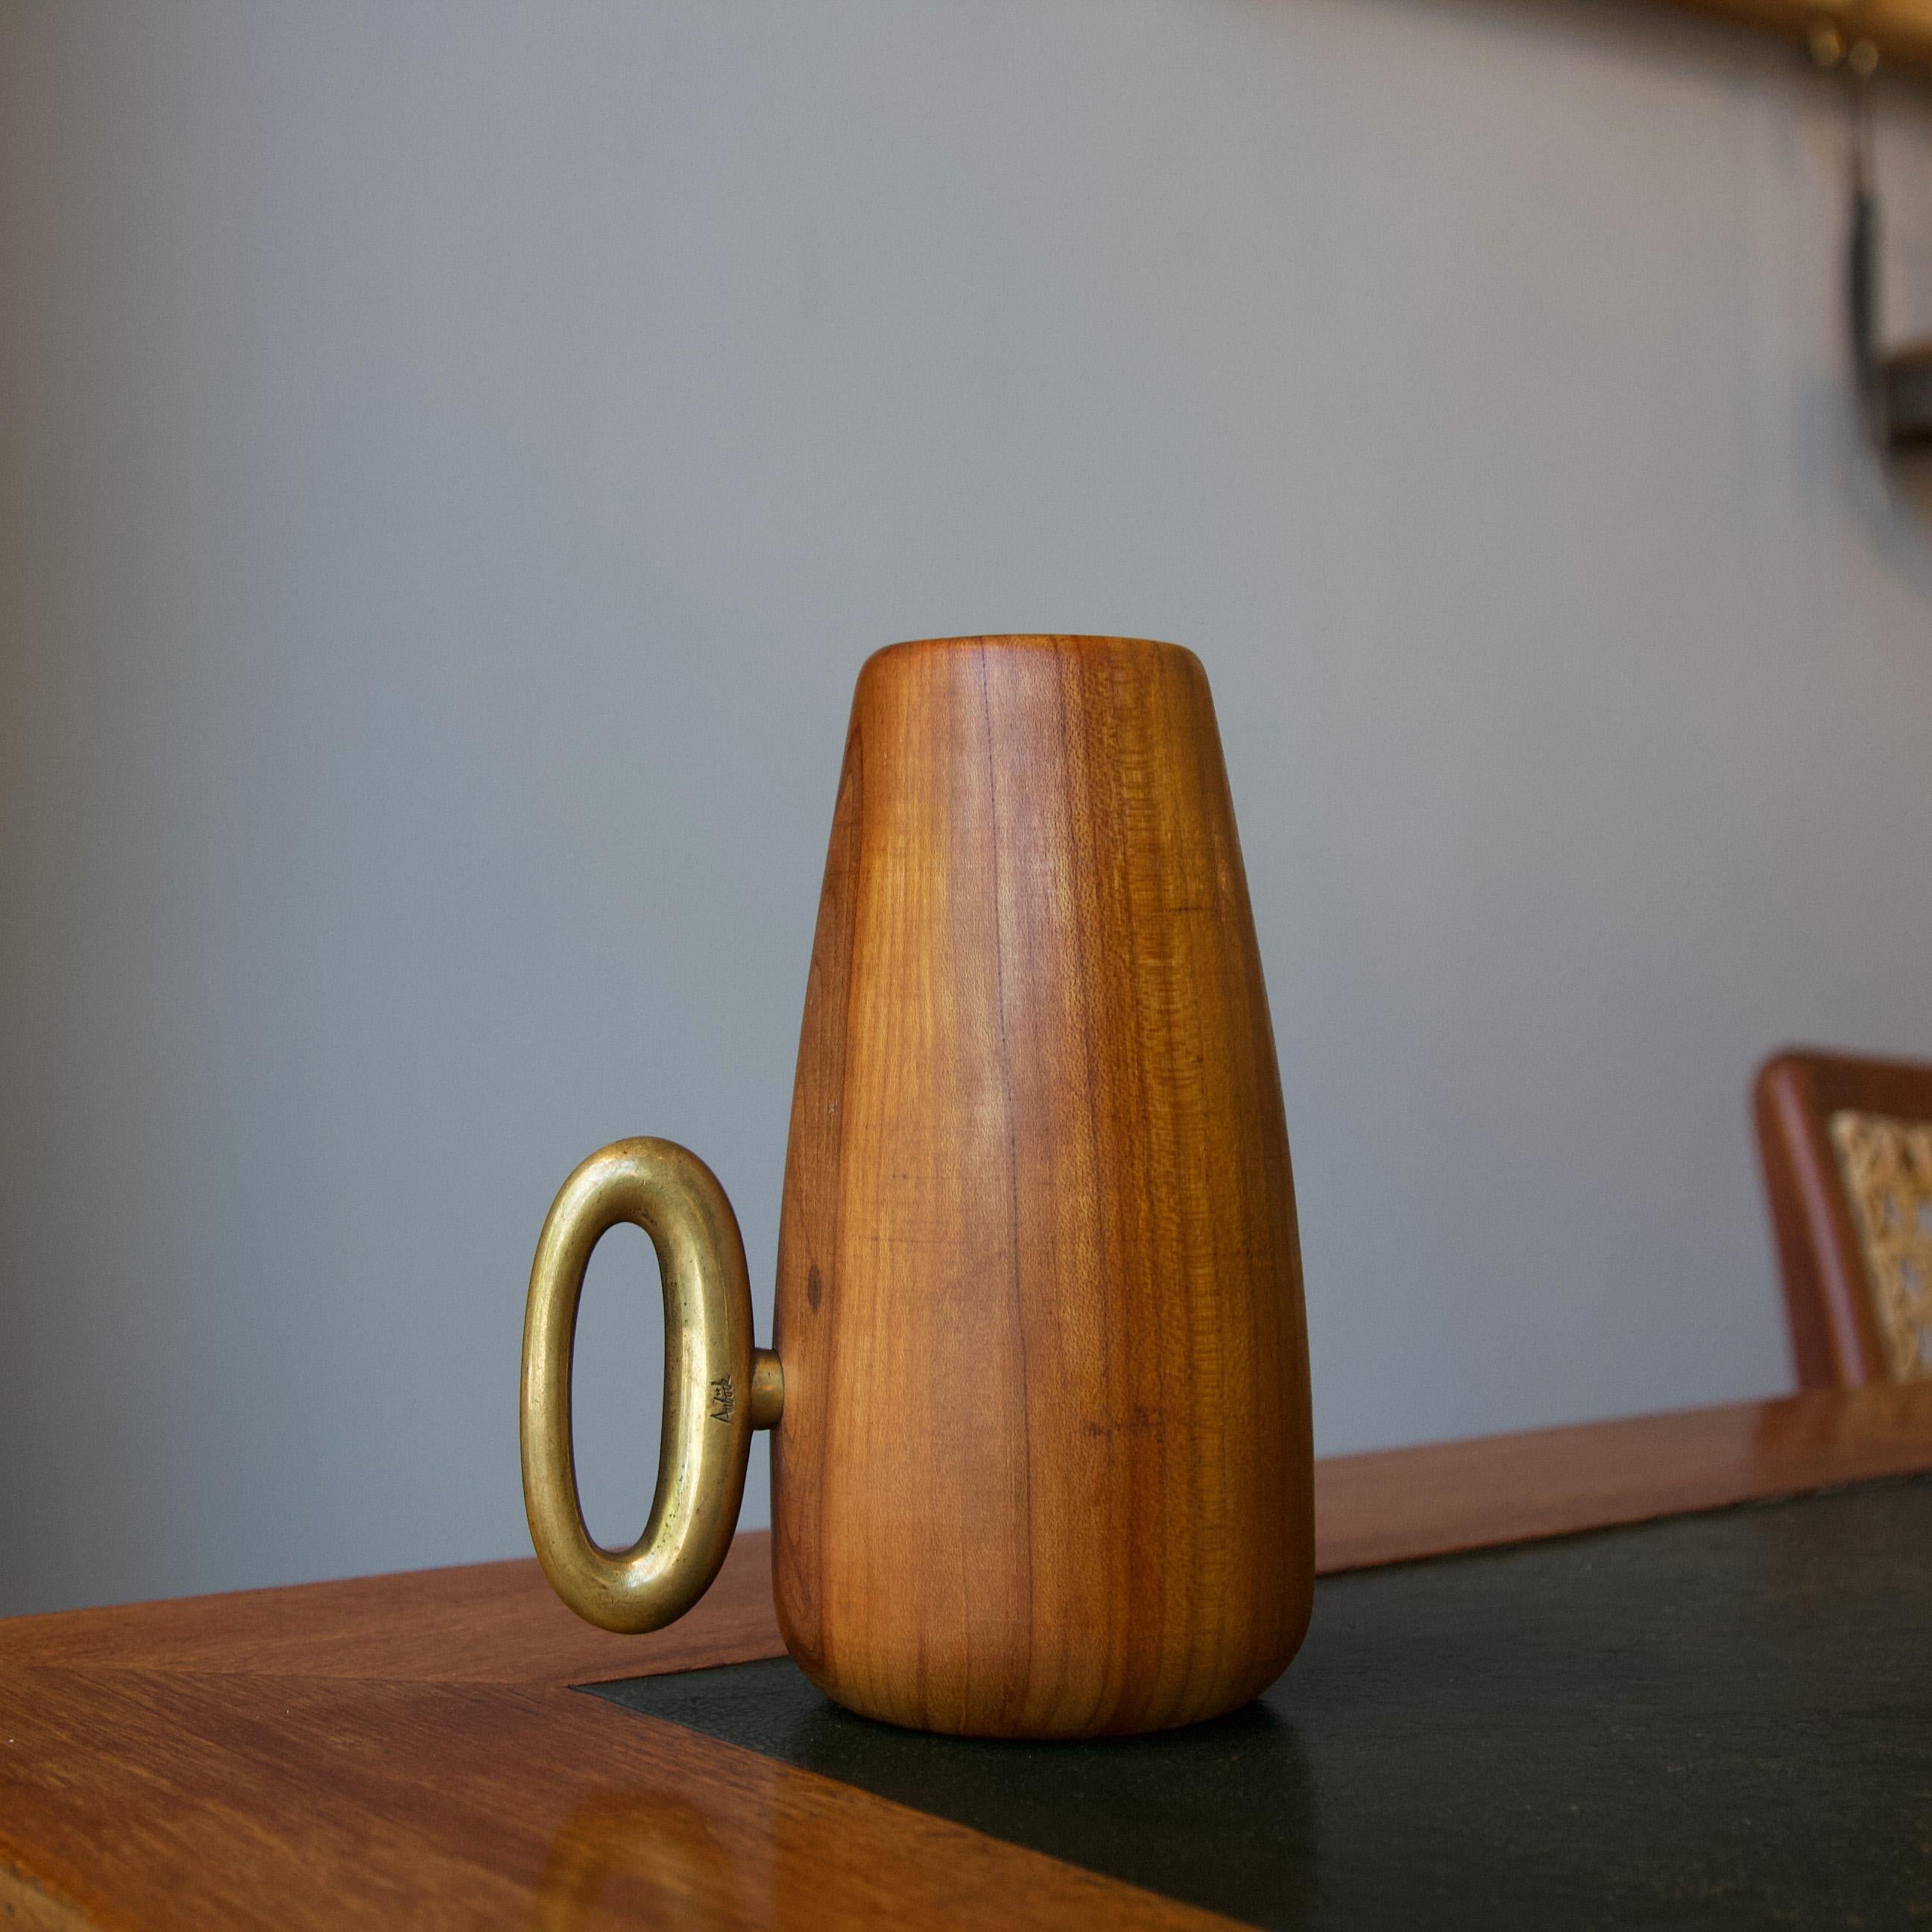 The brass handle of this turned walnut cup made by Carl Auböck II, C.1949, deceptively conceals one of the many functions of this delightfully tactile object. The cup itself can be used to store a multitude of dinner table essentials such as wooden